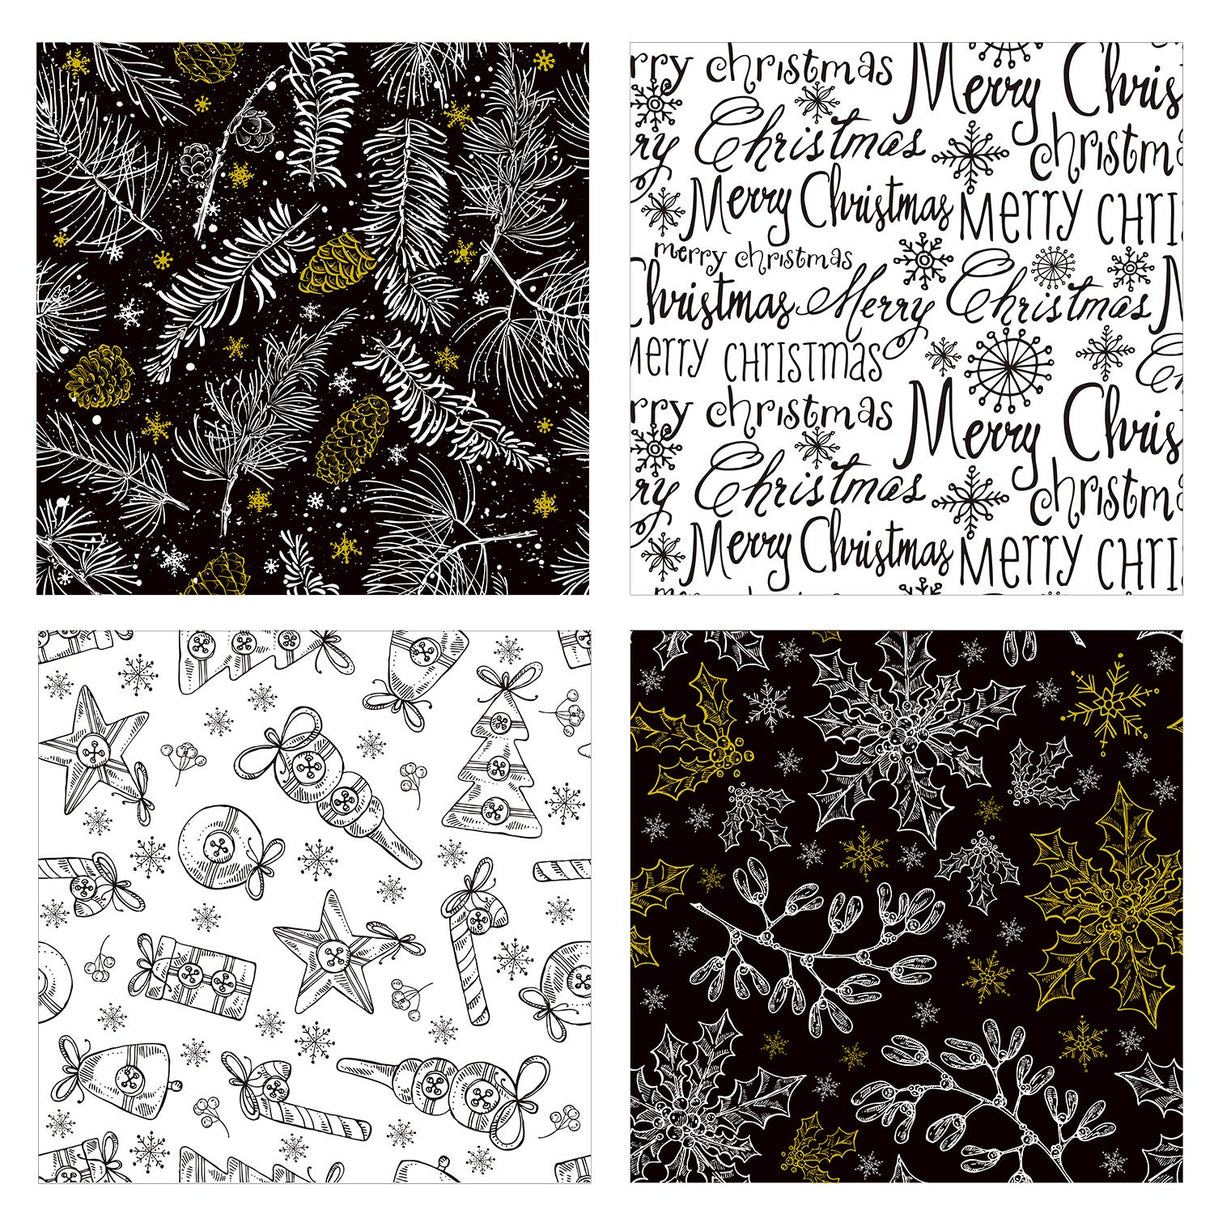 Christmas Wrapping Paper - Classic Black and White Style Designs - 4 Rolls - 30 inches x 10 feet per Roll